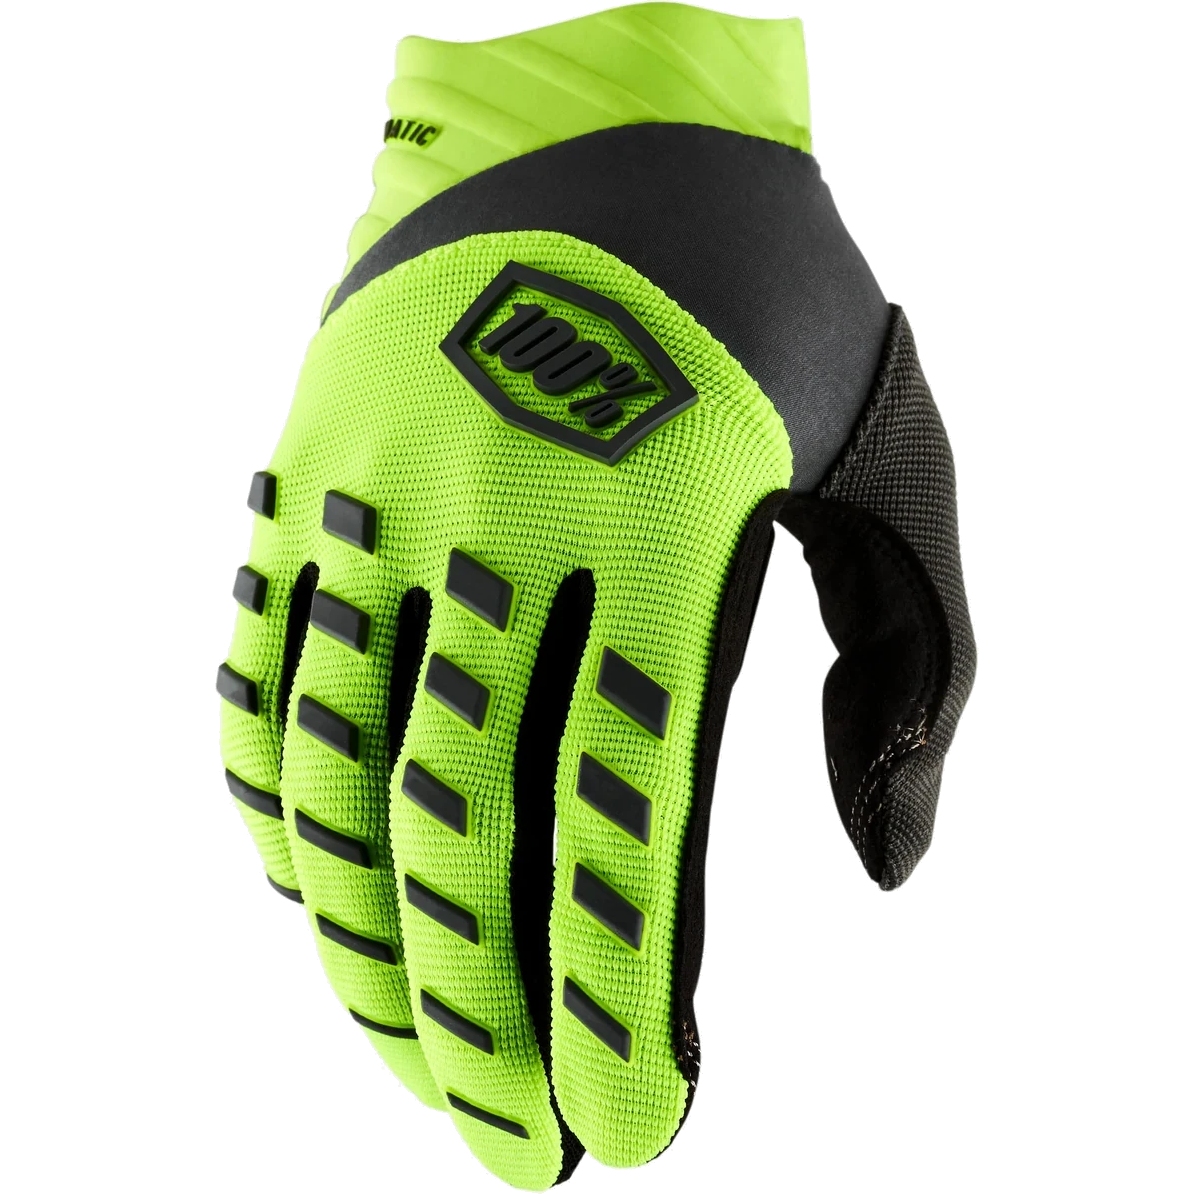 Image of 100% Airmatic Bike Gloves - fluo yellow